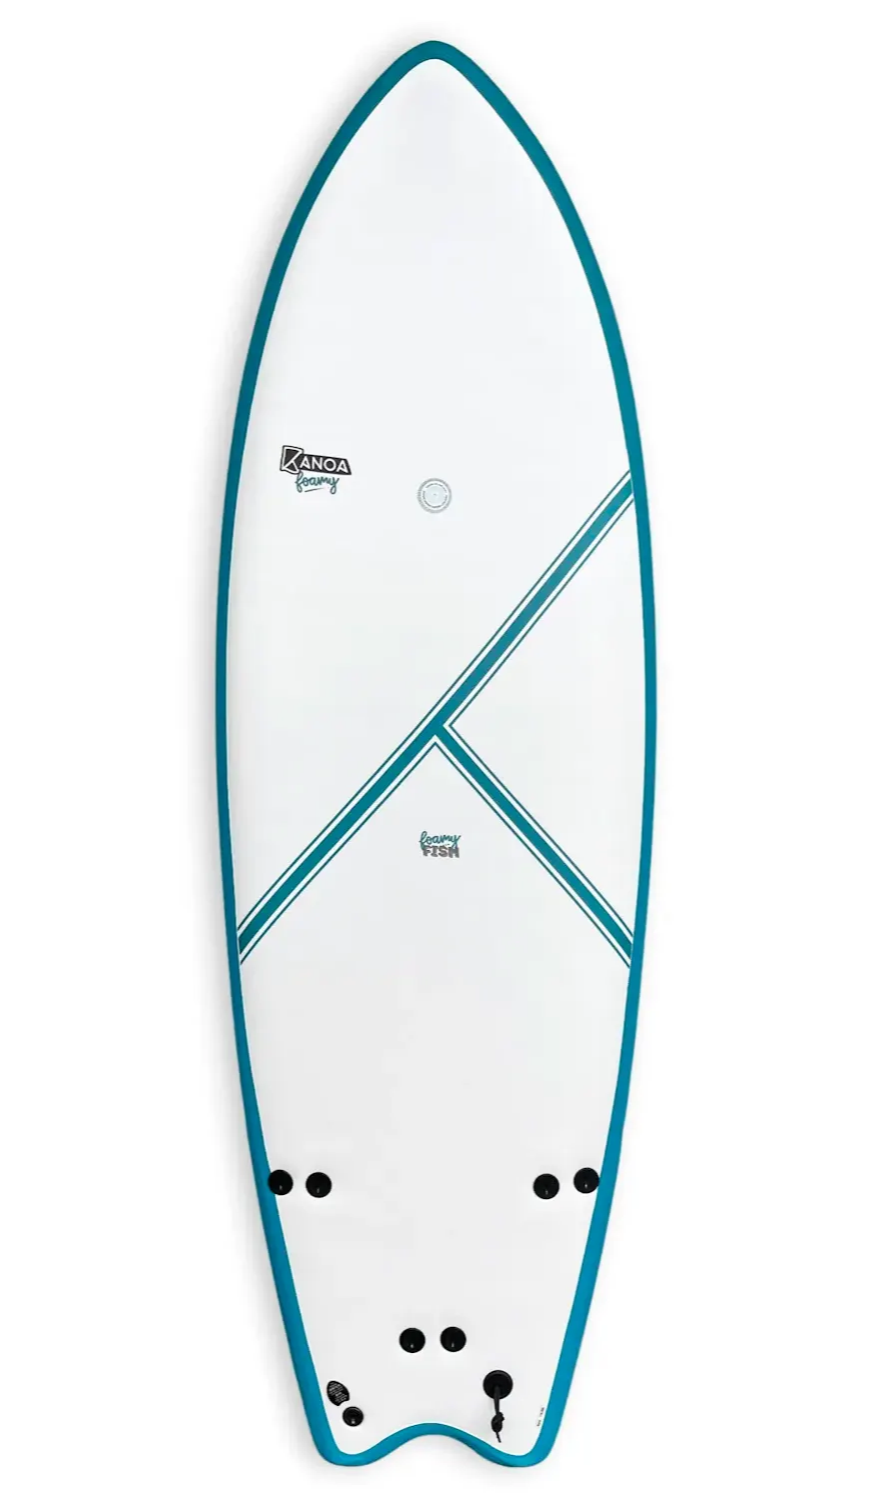 Discover our foamie softtop Surfboard for beginners and intermediates